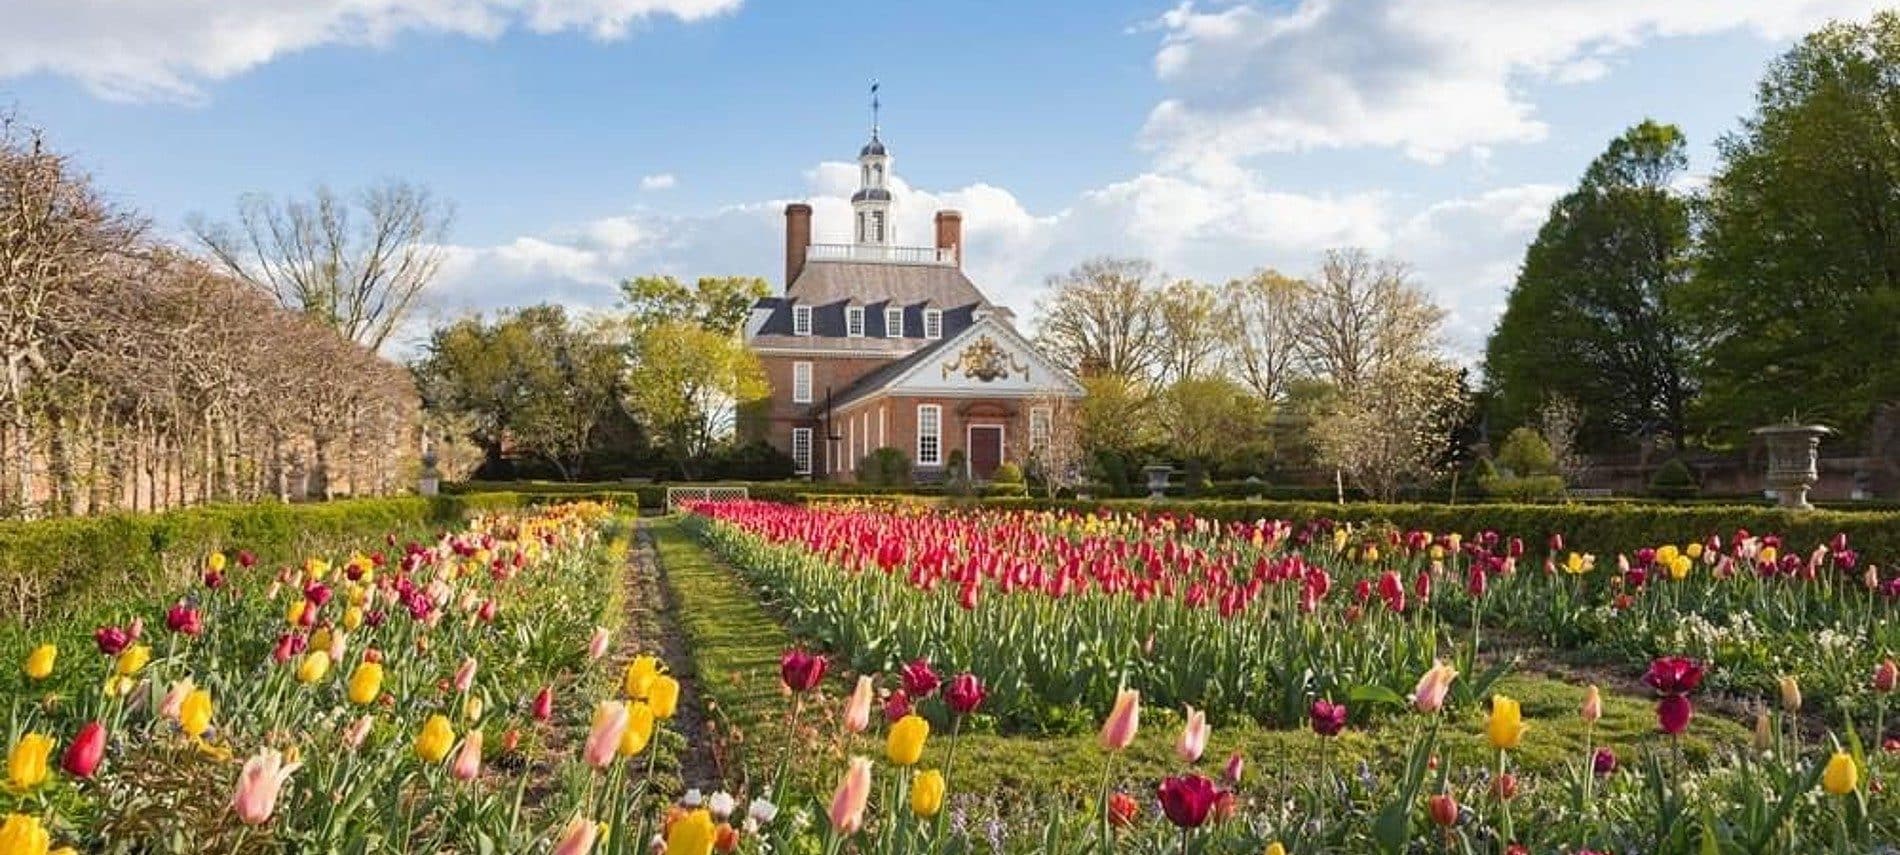 Historic building at the end of a large open field of brightly colored tulips